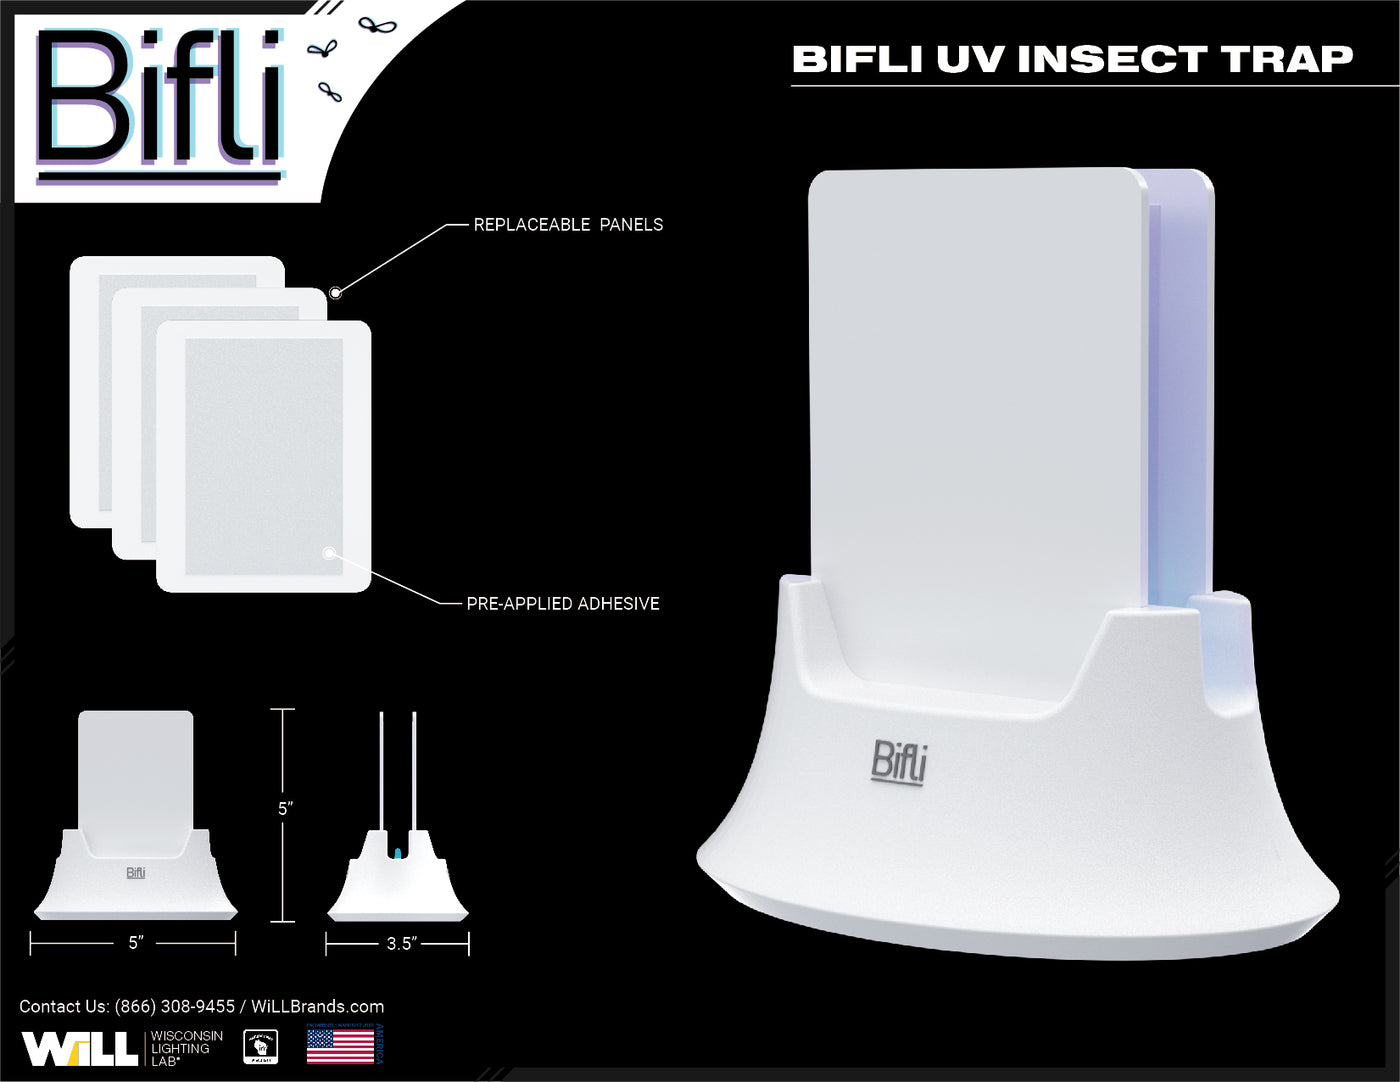 UV LED INSECT TRAP WiLL DESIGN ASSIST PROJECT